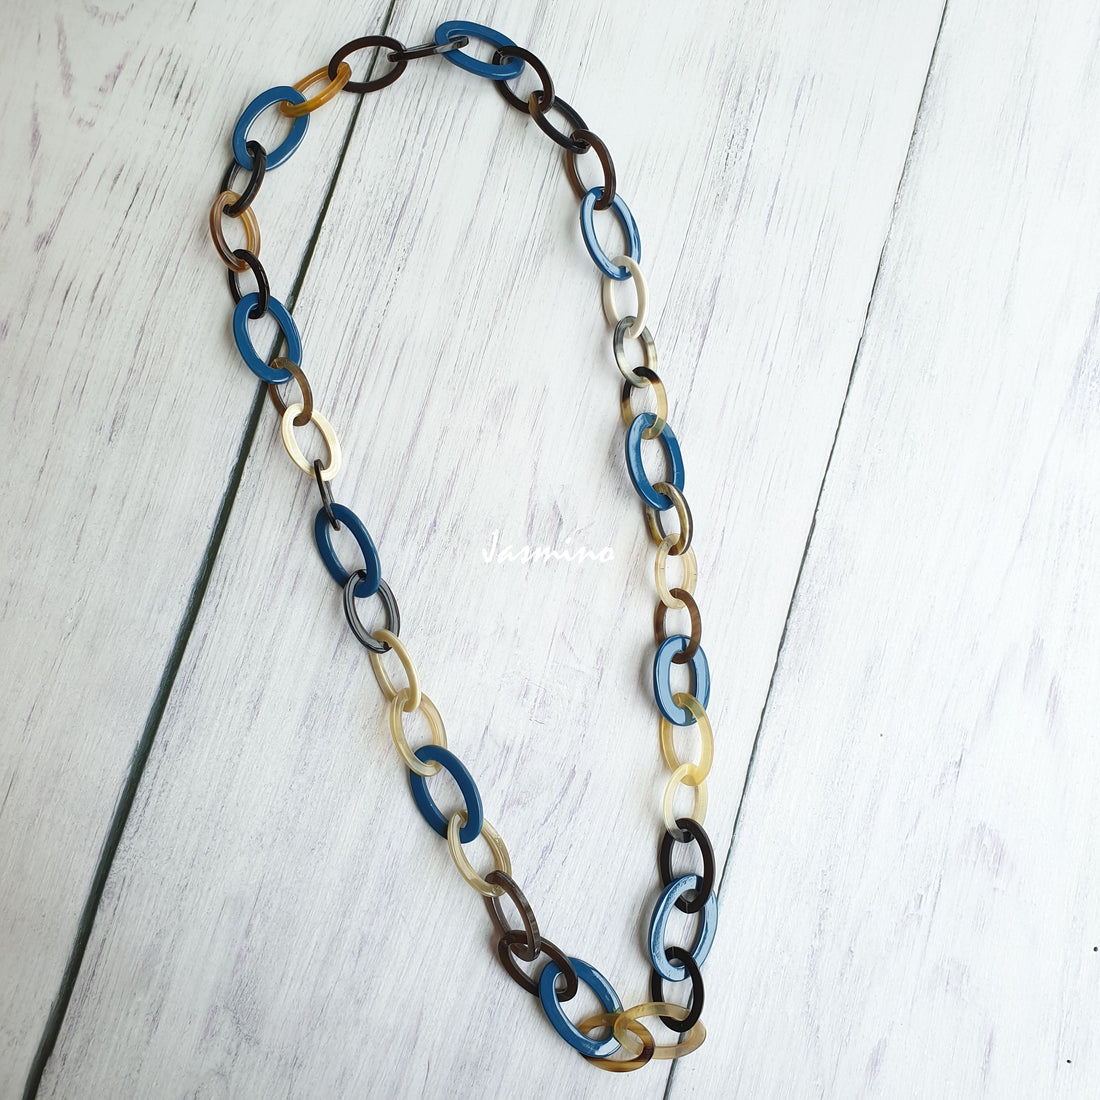 Jasmino unique handmade Vintage small chain necklace features blue and brown in natural buffalo horn for women